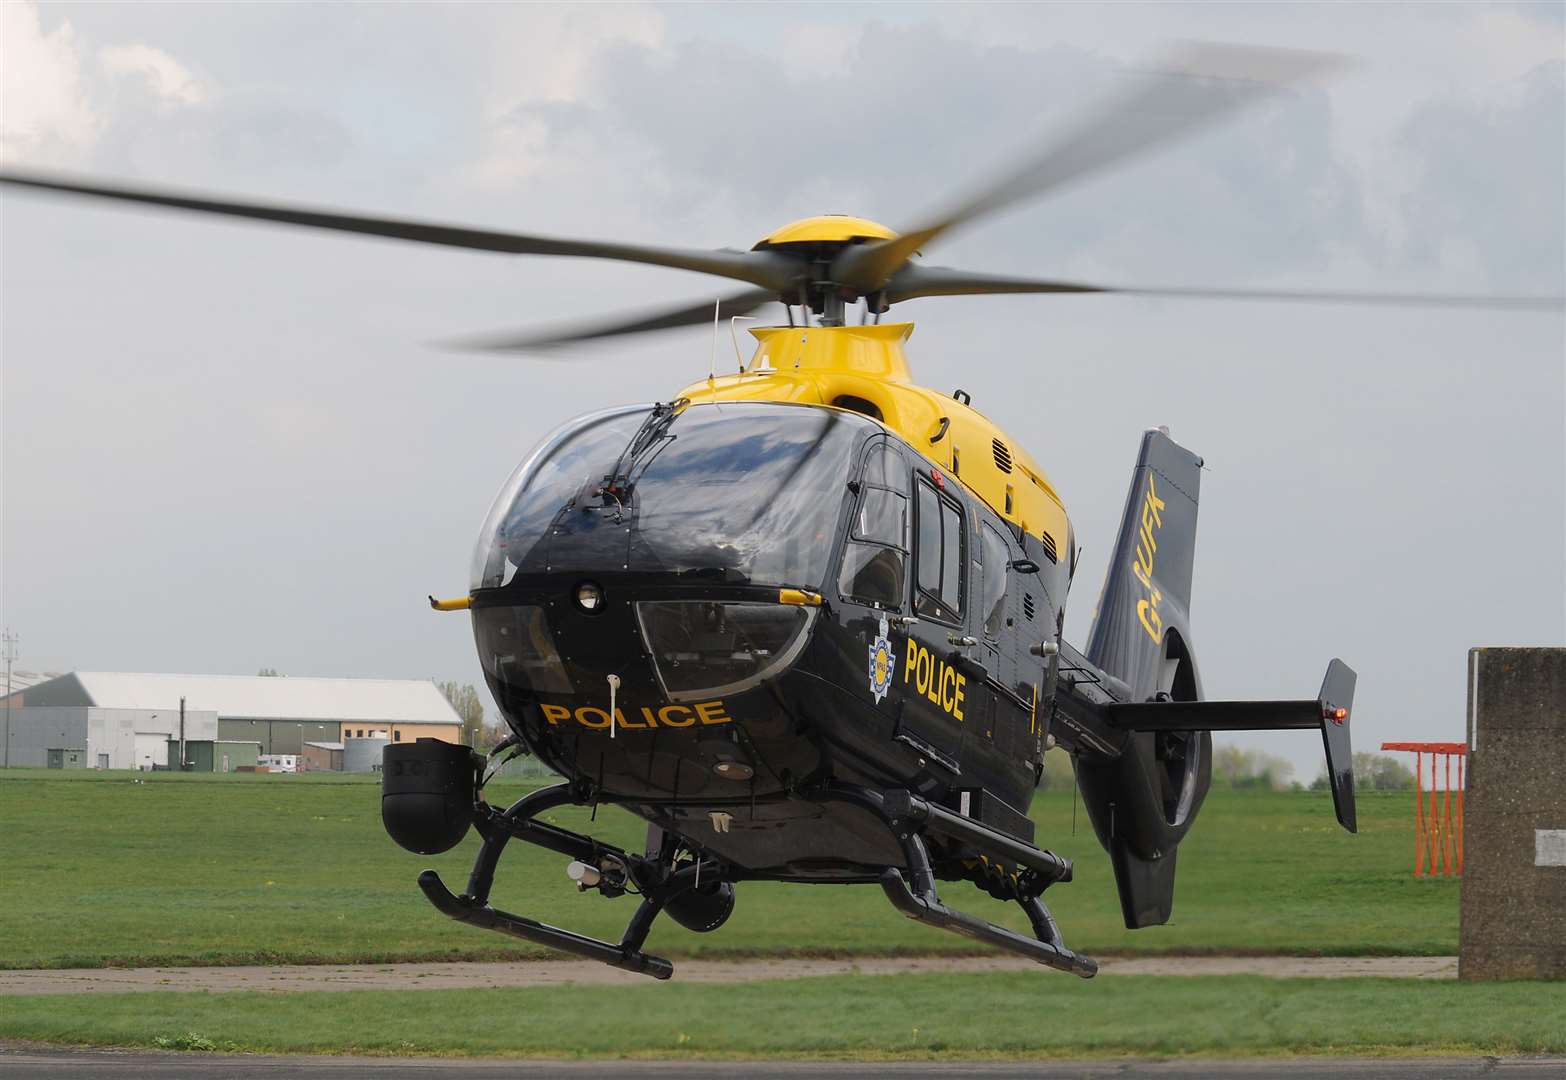 The National Police Air Service helicopter